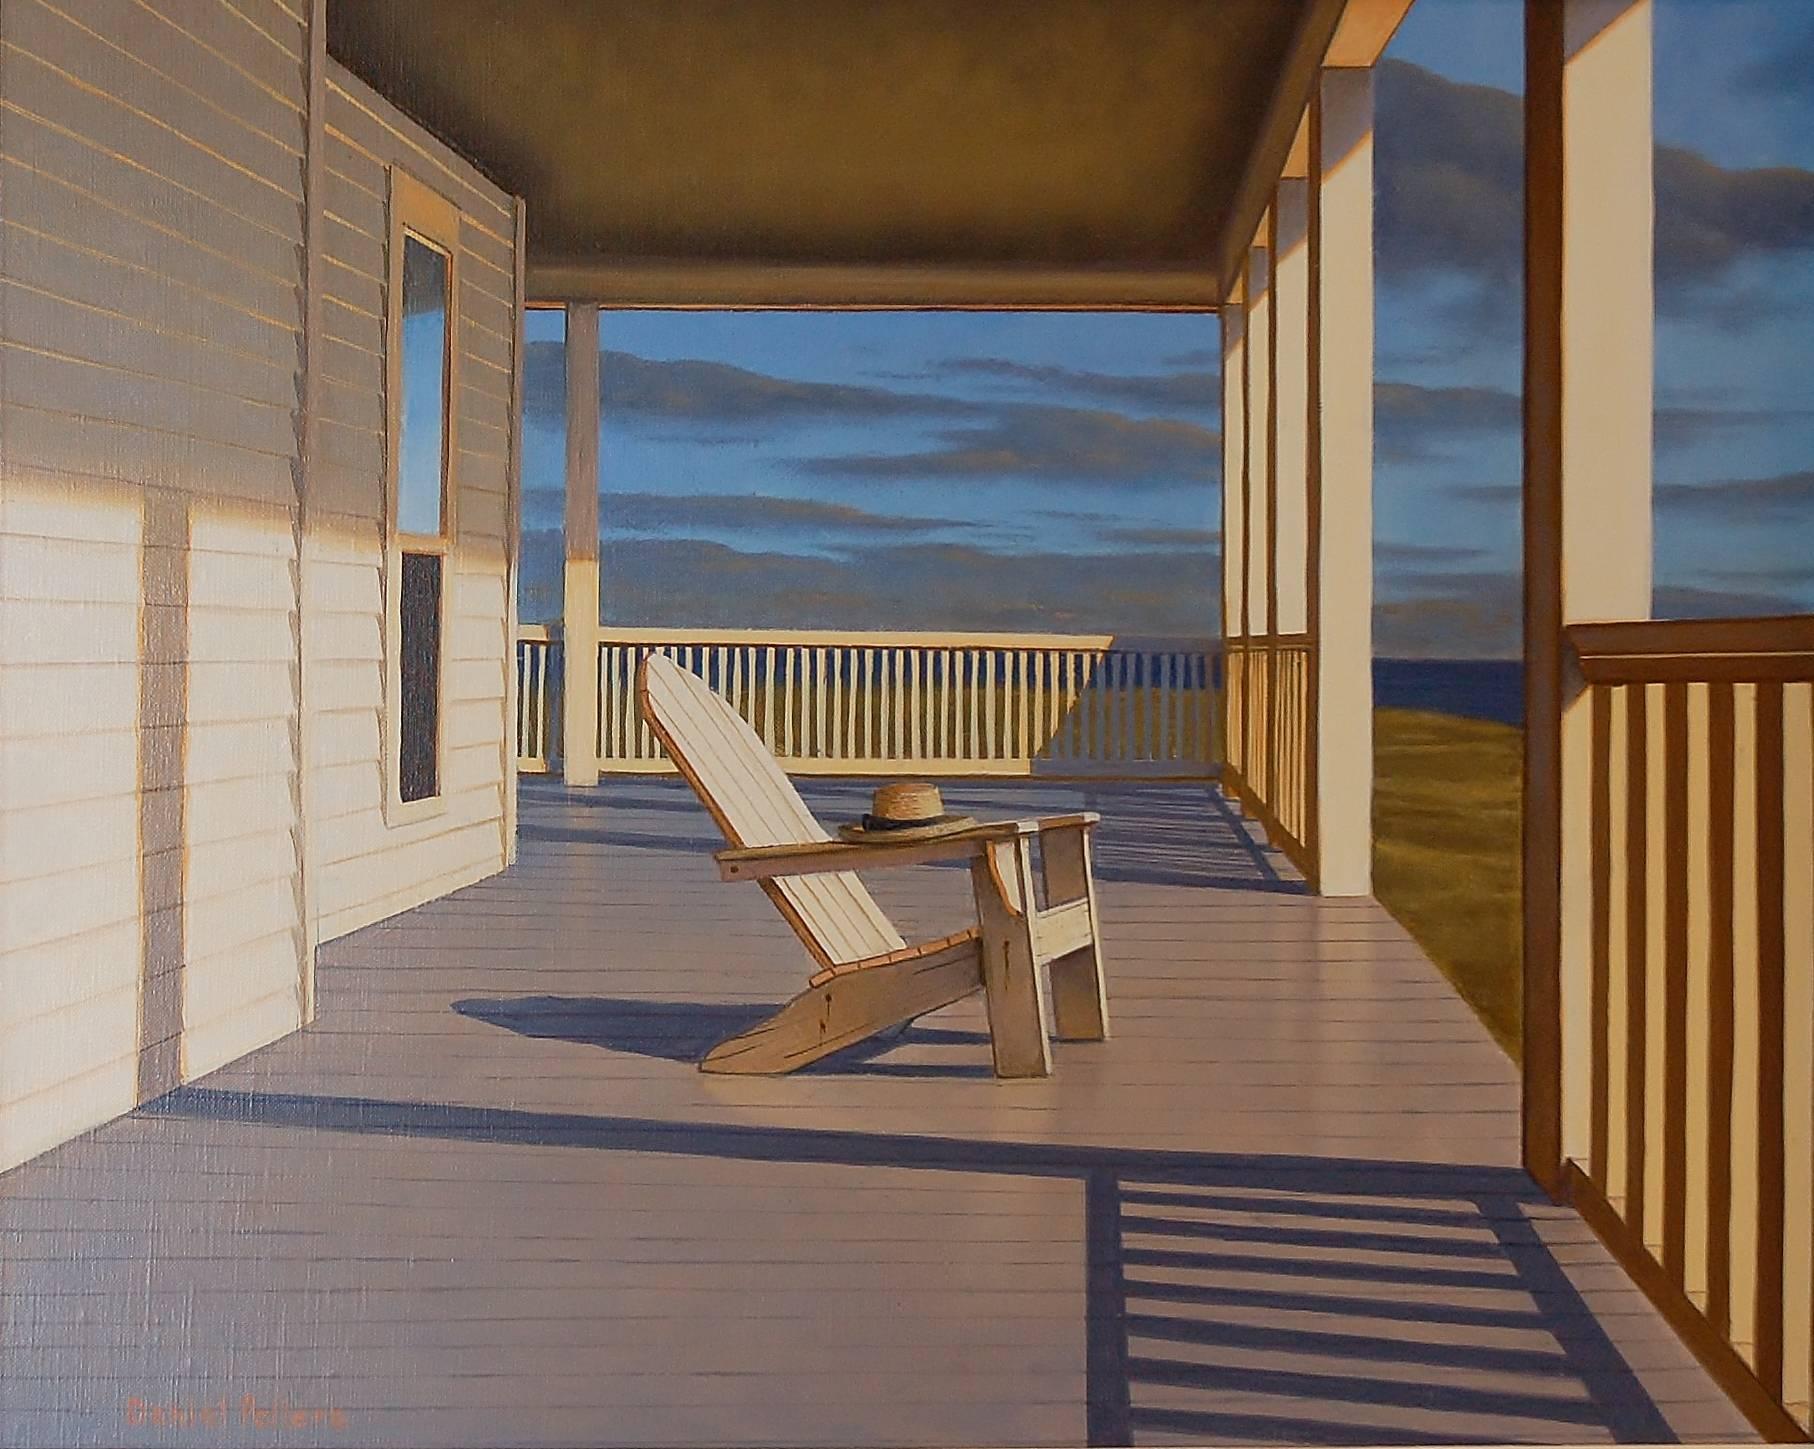 Daniel Pollera Landscape Painting - 'Watching the Sunset', Contemporary Realist Marine Oil Painting